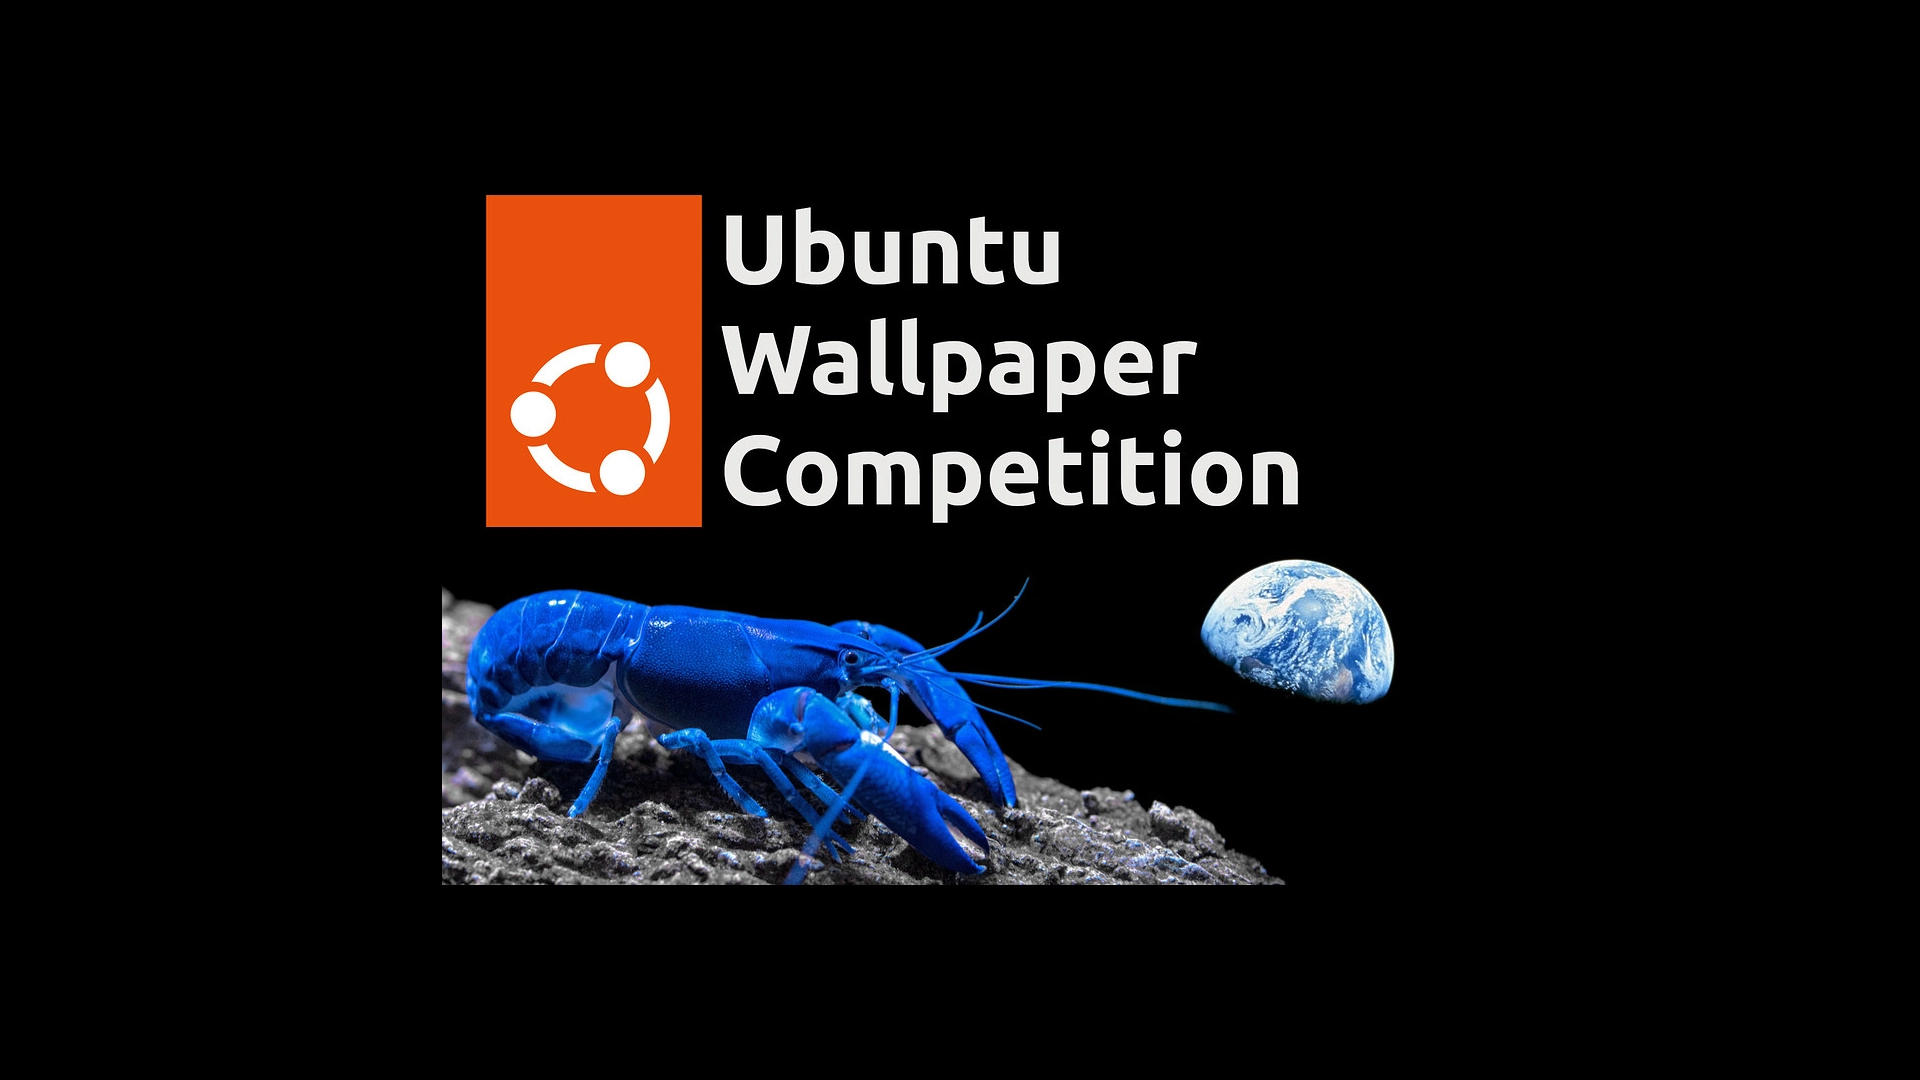 Ubuntu 23.04 “Lunar Lobster” Wallpaper Competition Opens for Entries